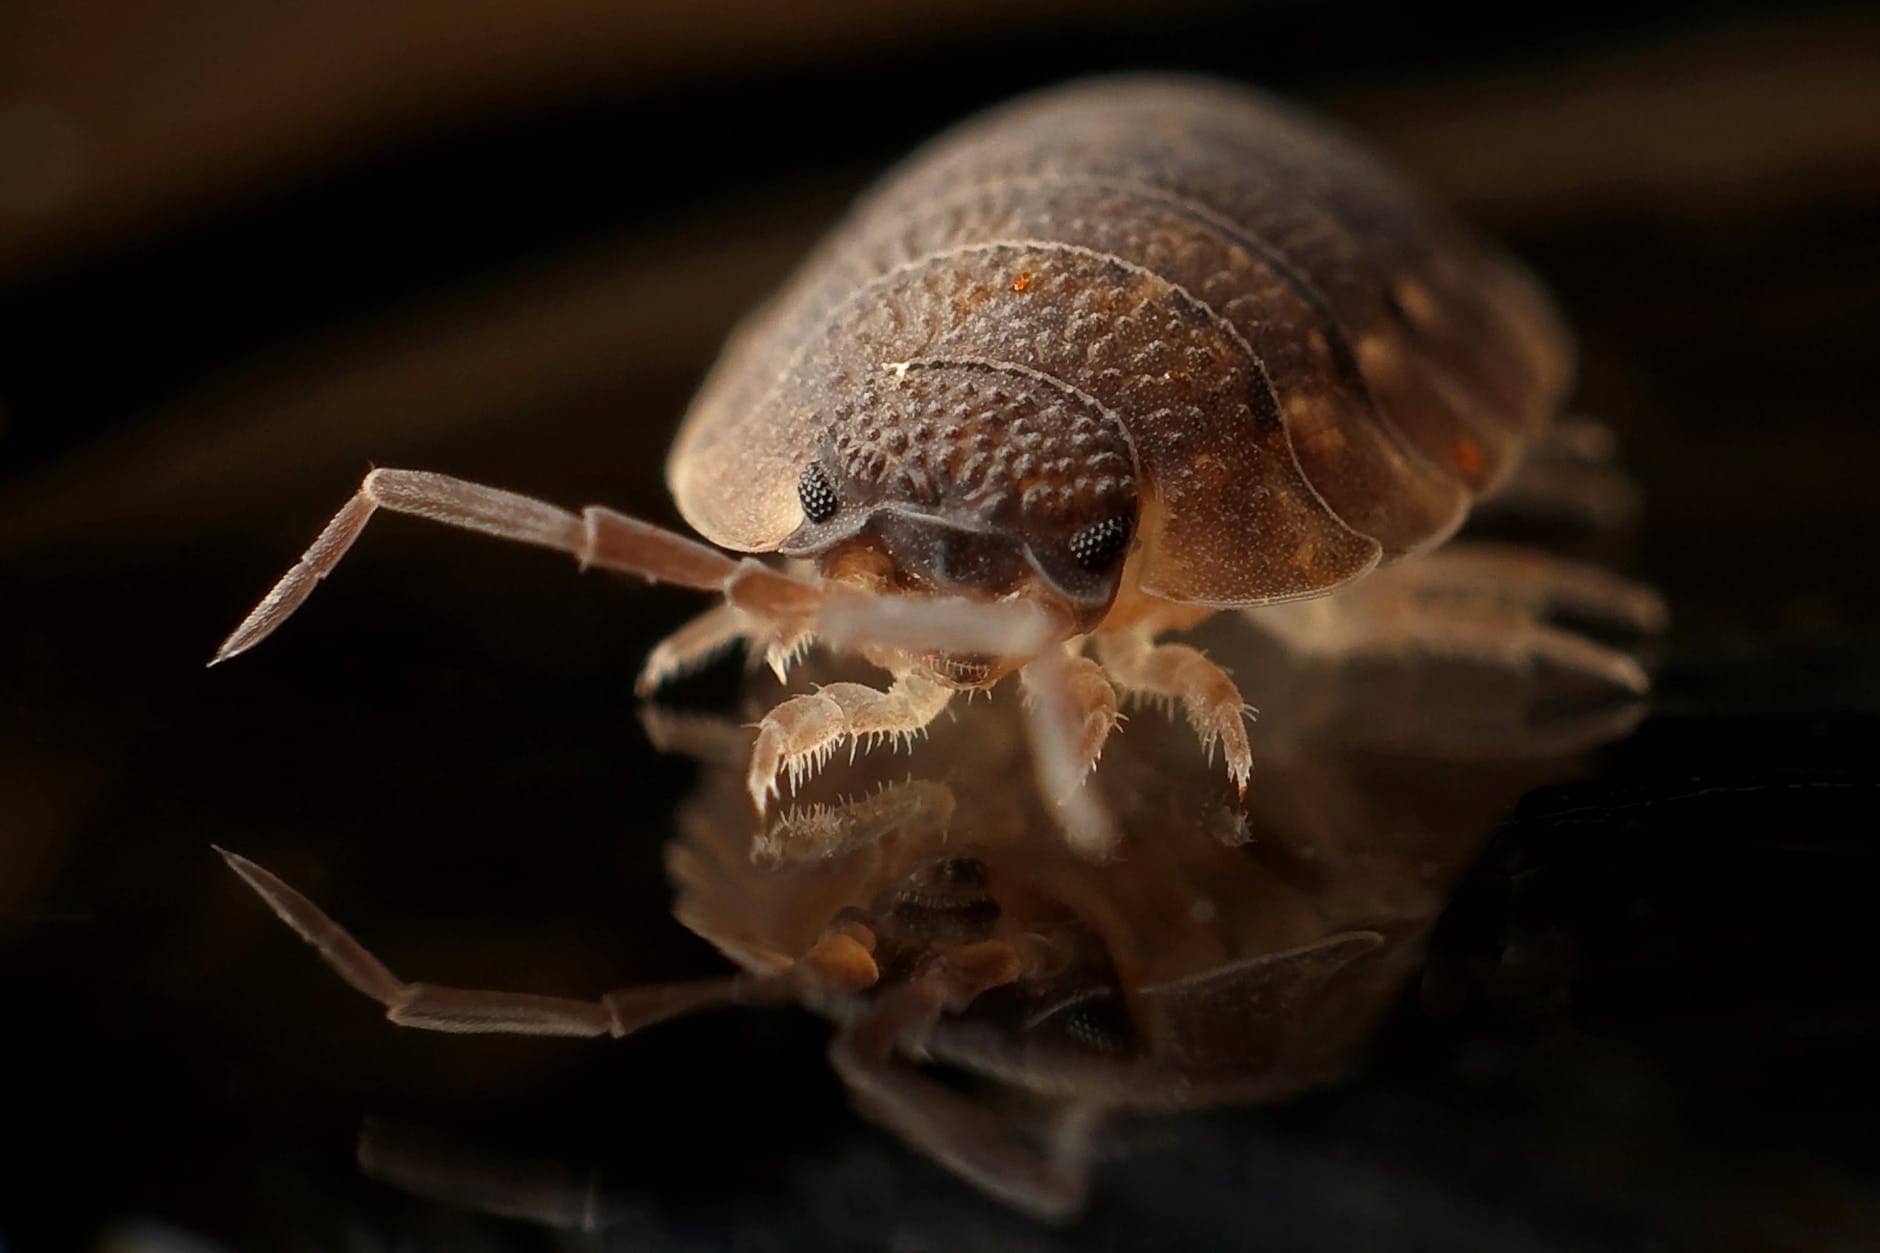 How long can bed bugs live without food supply